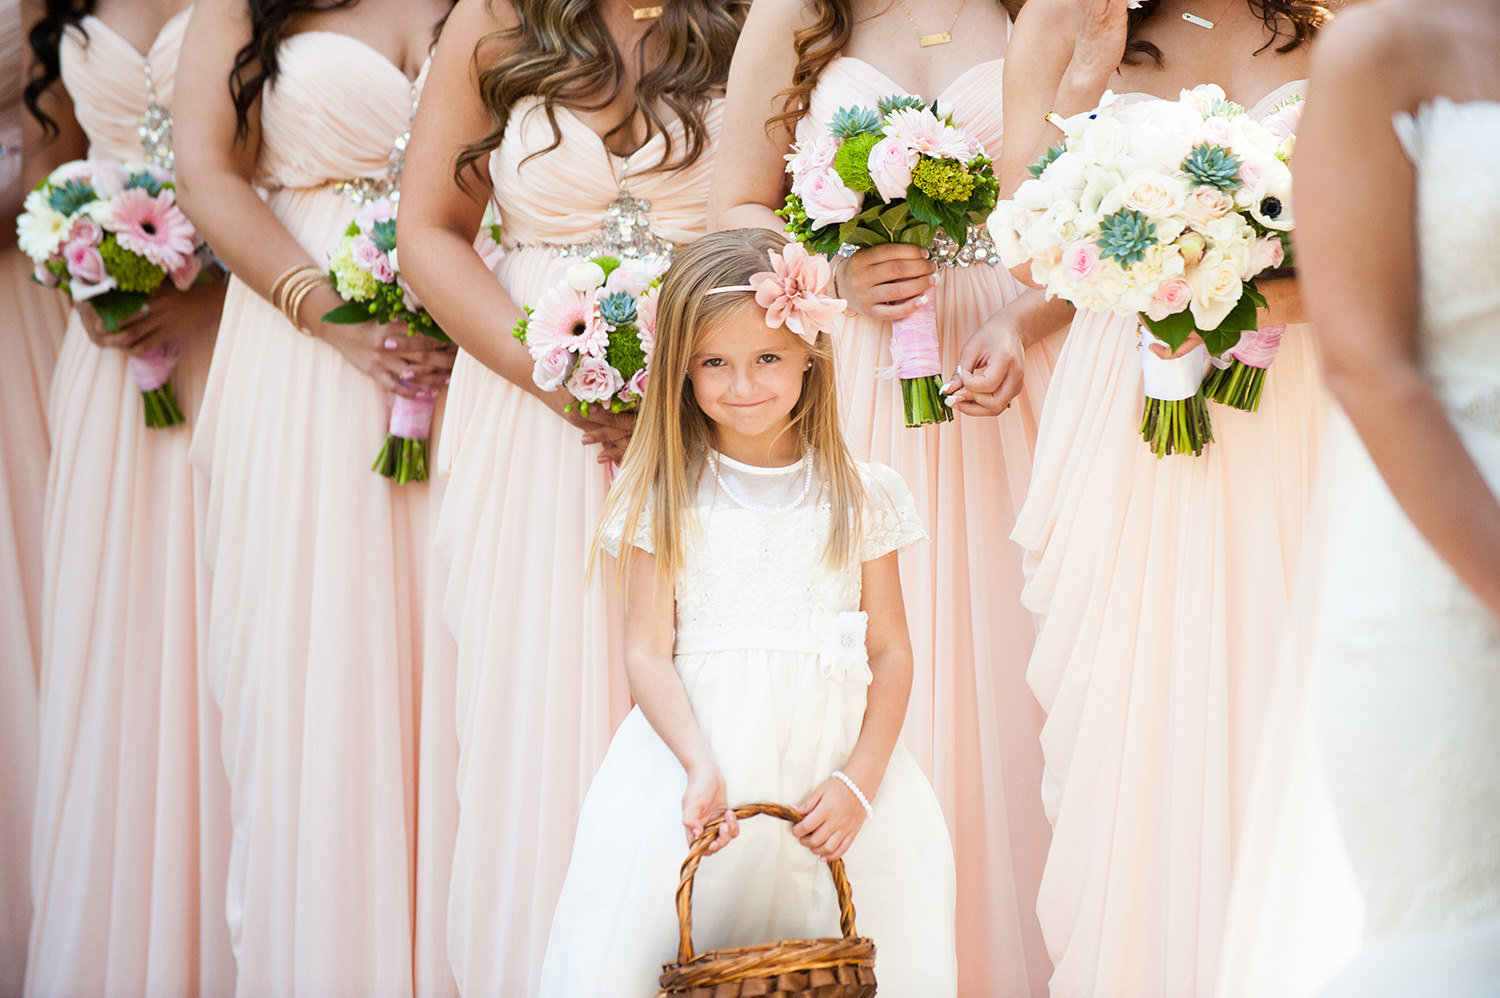 Sweet moment captured of the flower girl during the wedding ceremony